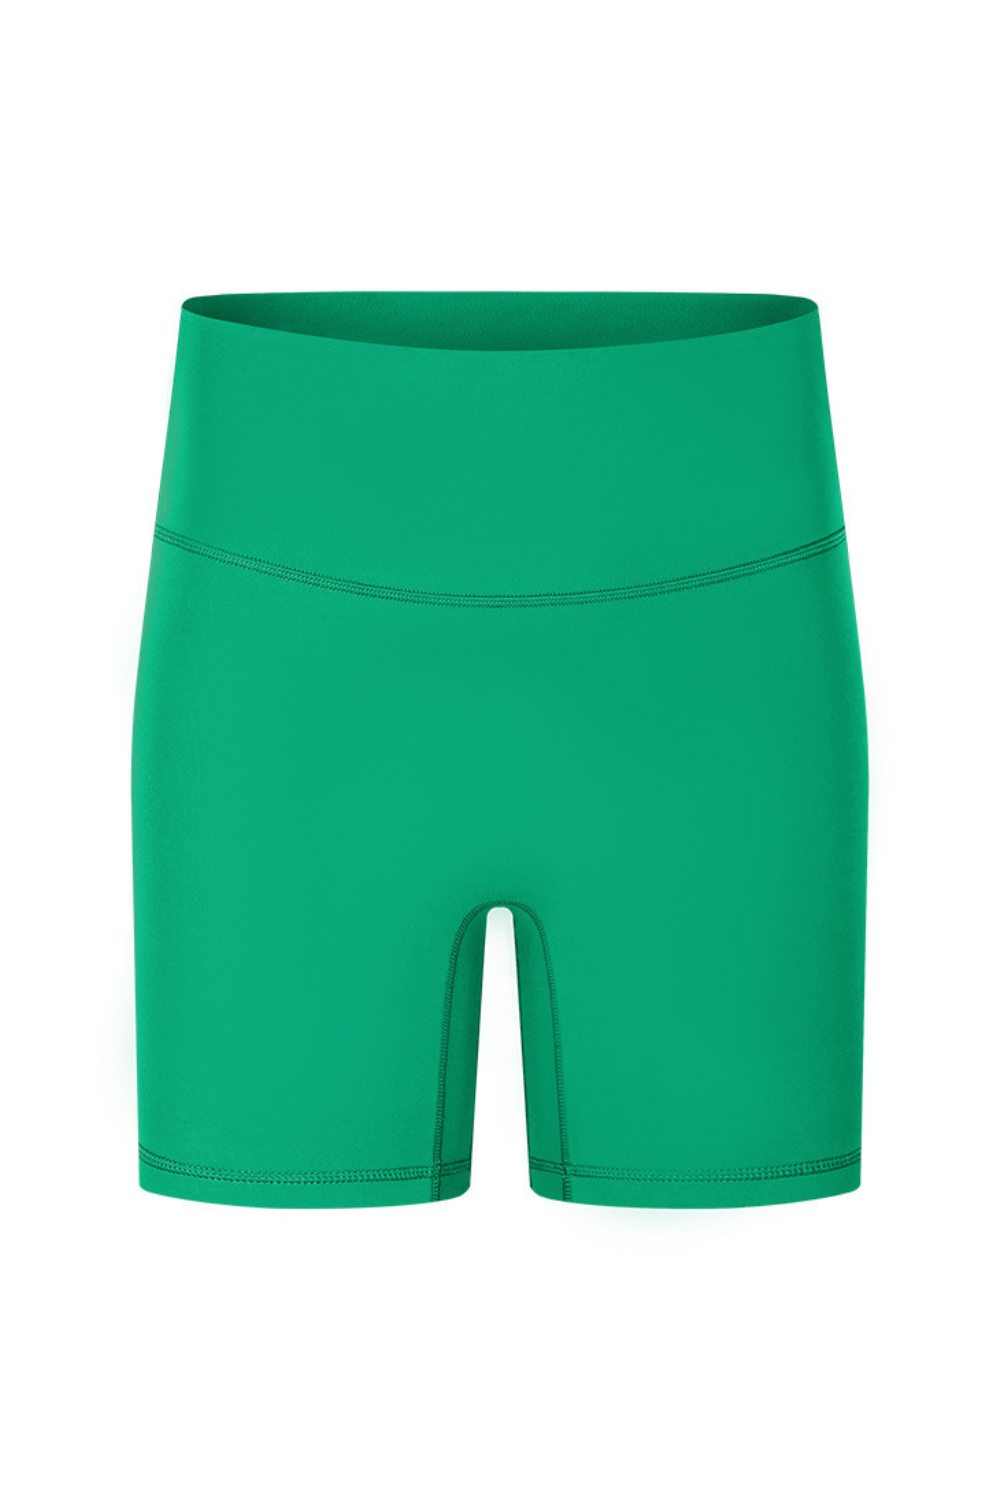 Kelly Green "Mia" Comfort High Rise Quick Dry Second Skin Shorts